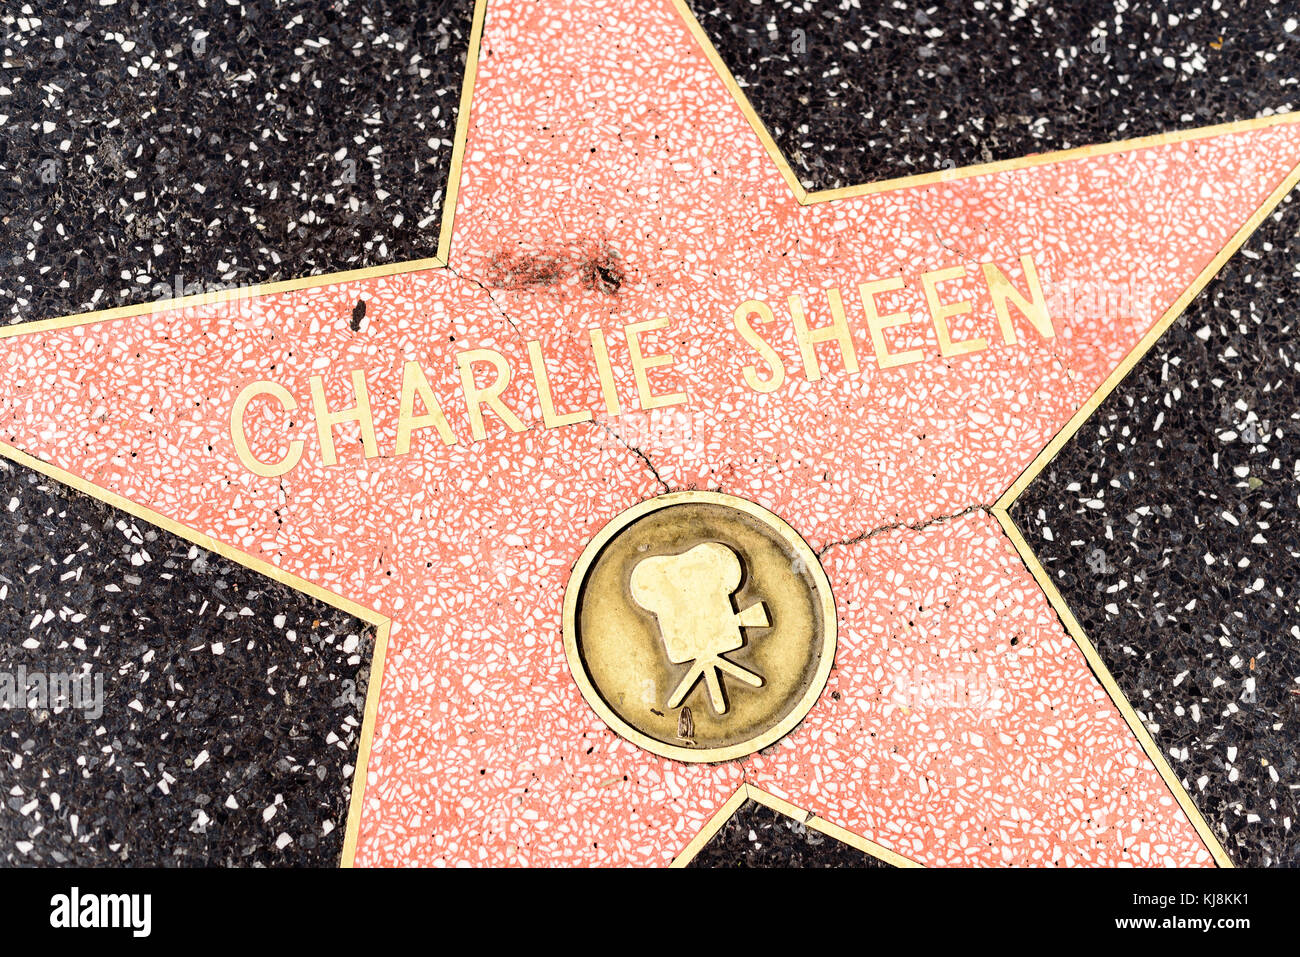 HOLLYWOOD, CA - DECEMBER 06: Charlie Sheen star on the Hollywood Walk of Fame in Hollywood, California on Dec. 6, 2016. Stock Photo